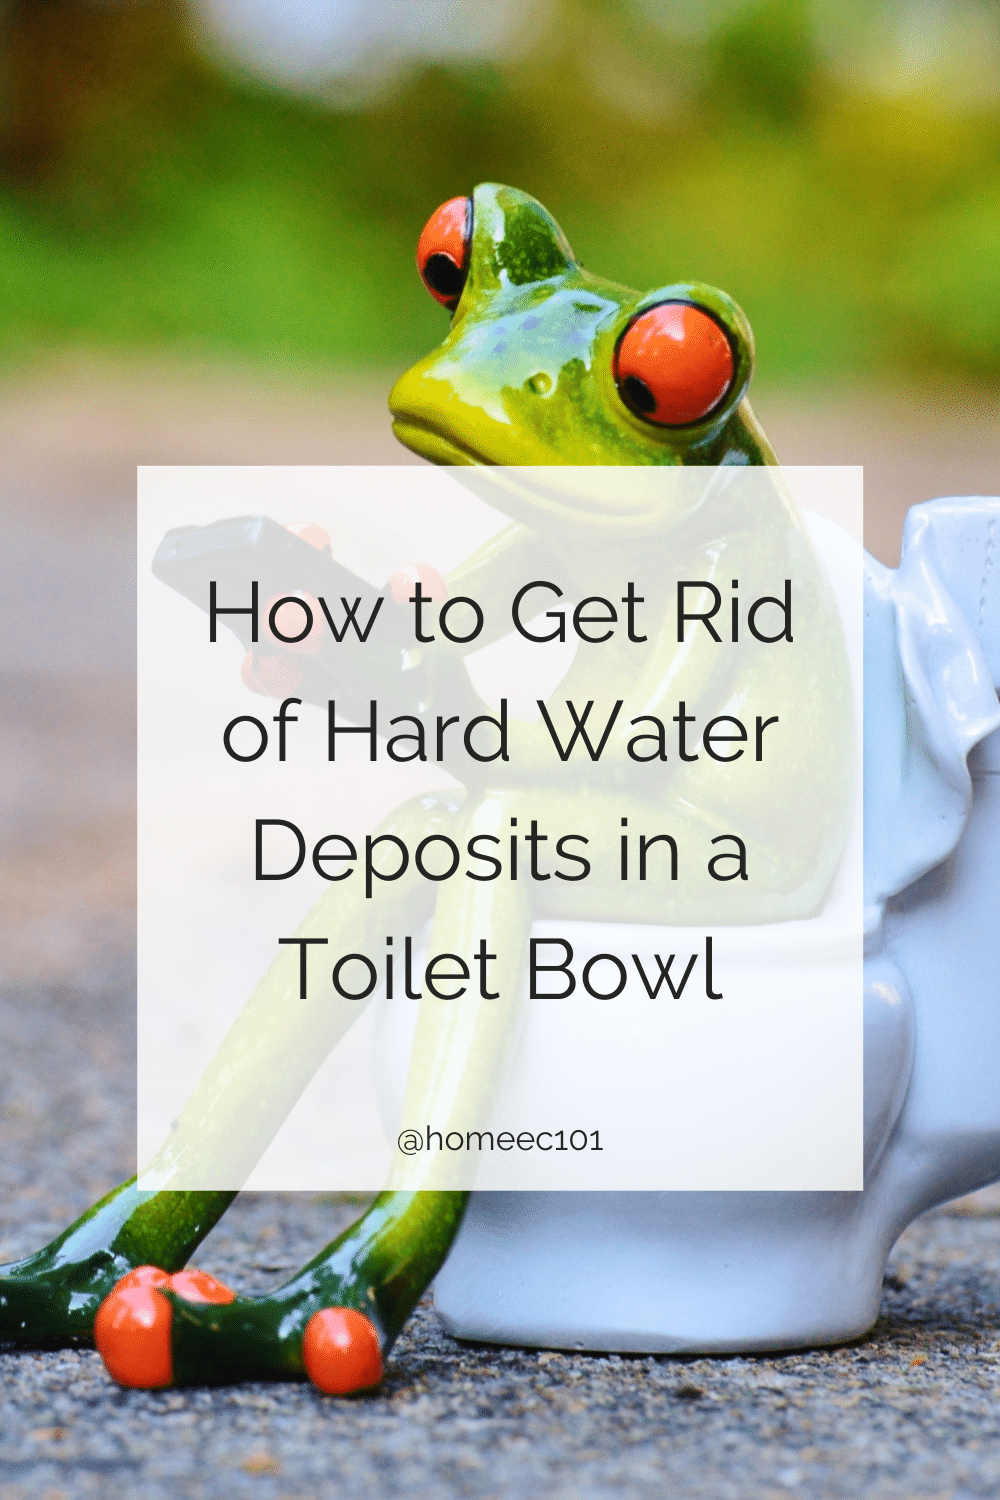 ceramic frog sitting on a toilet with text how to get rid of hard water deposits in a toilet bowl 